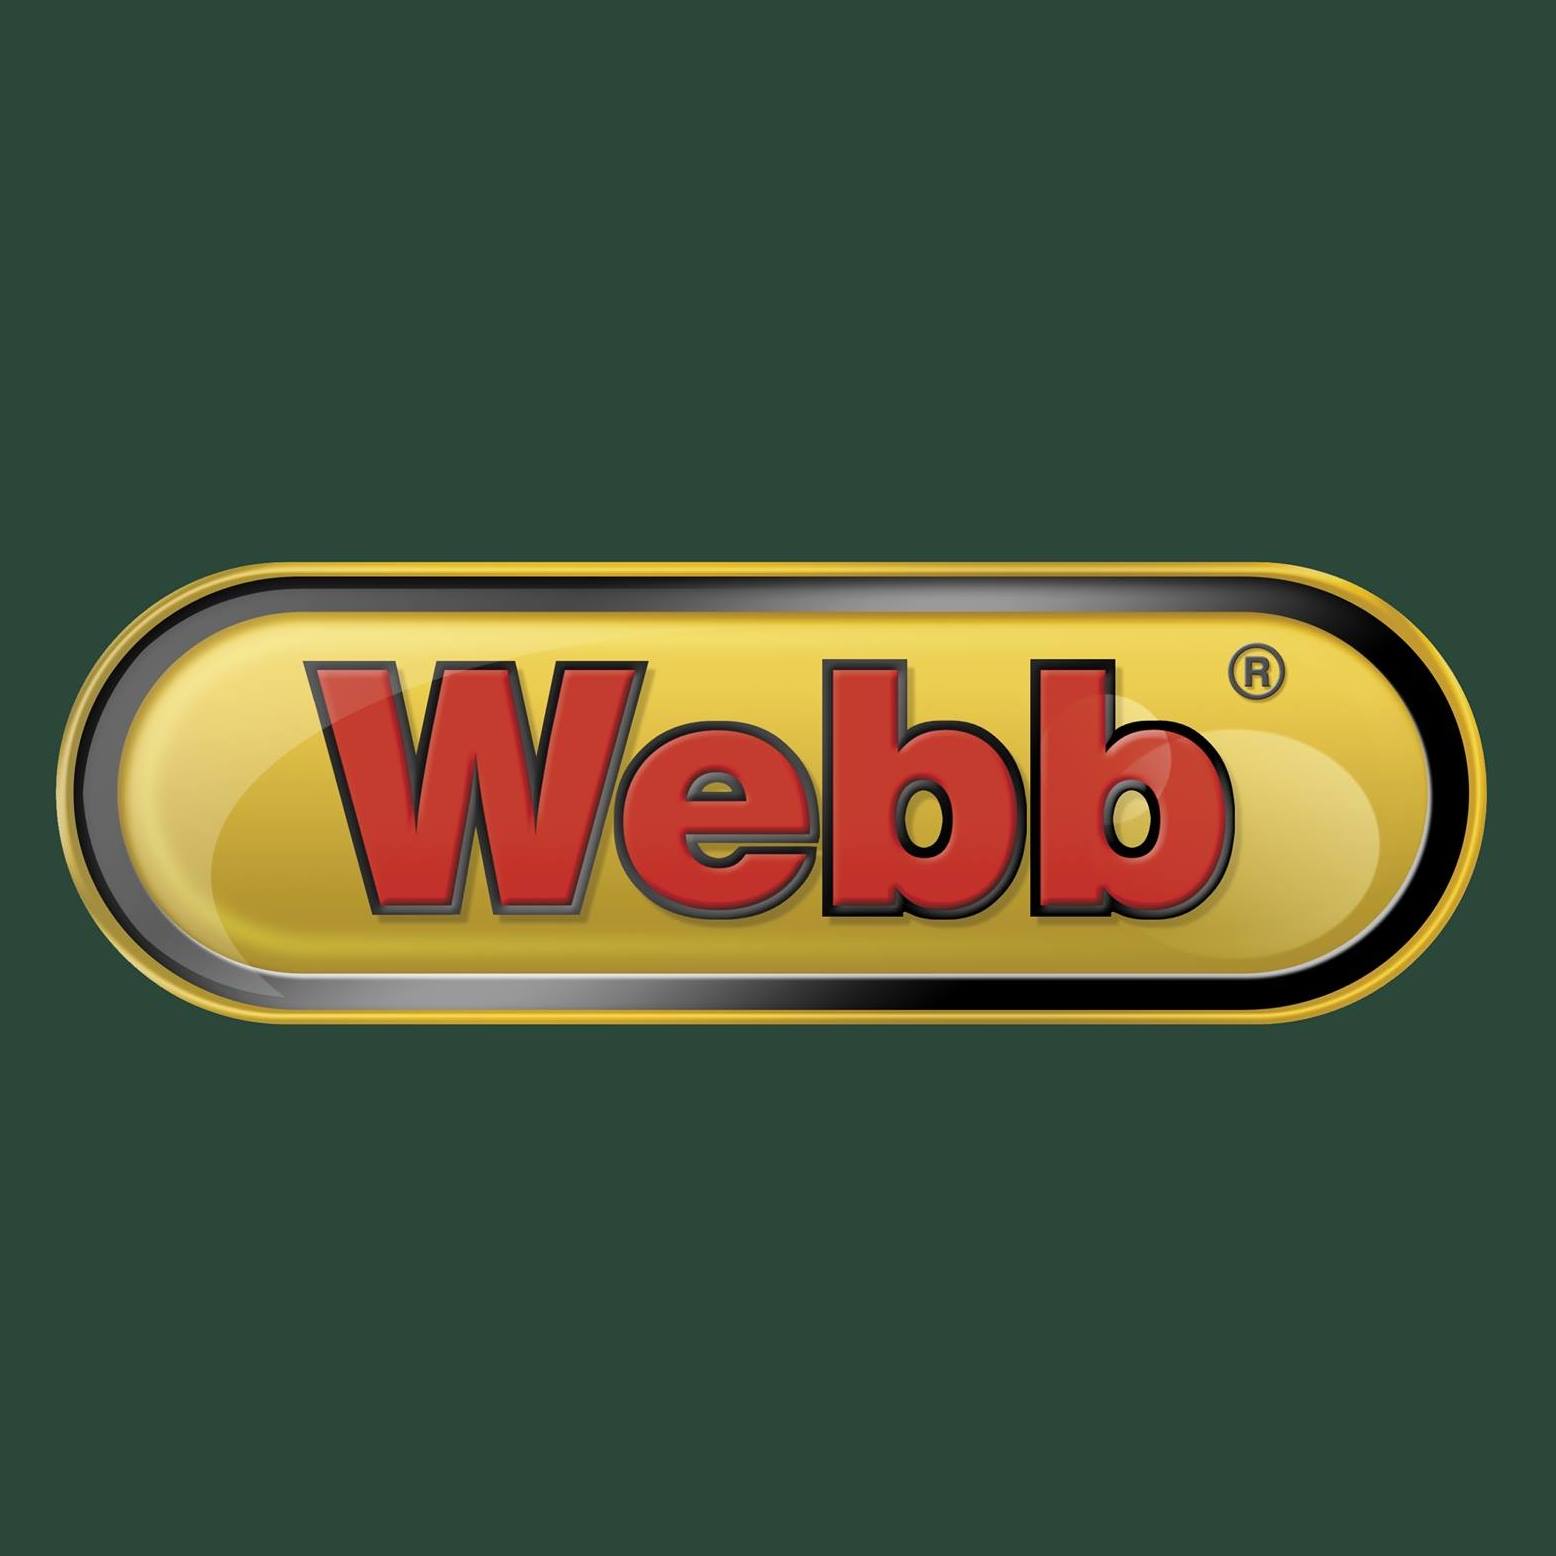 Webb Garden Machinery And Tools